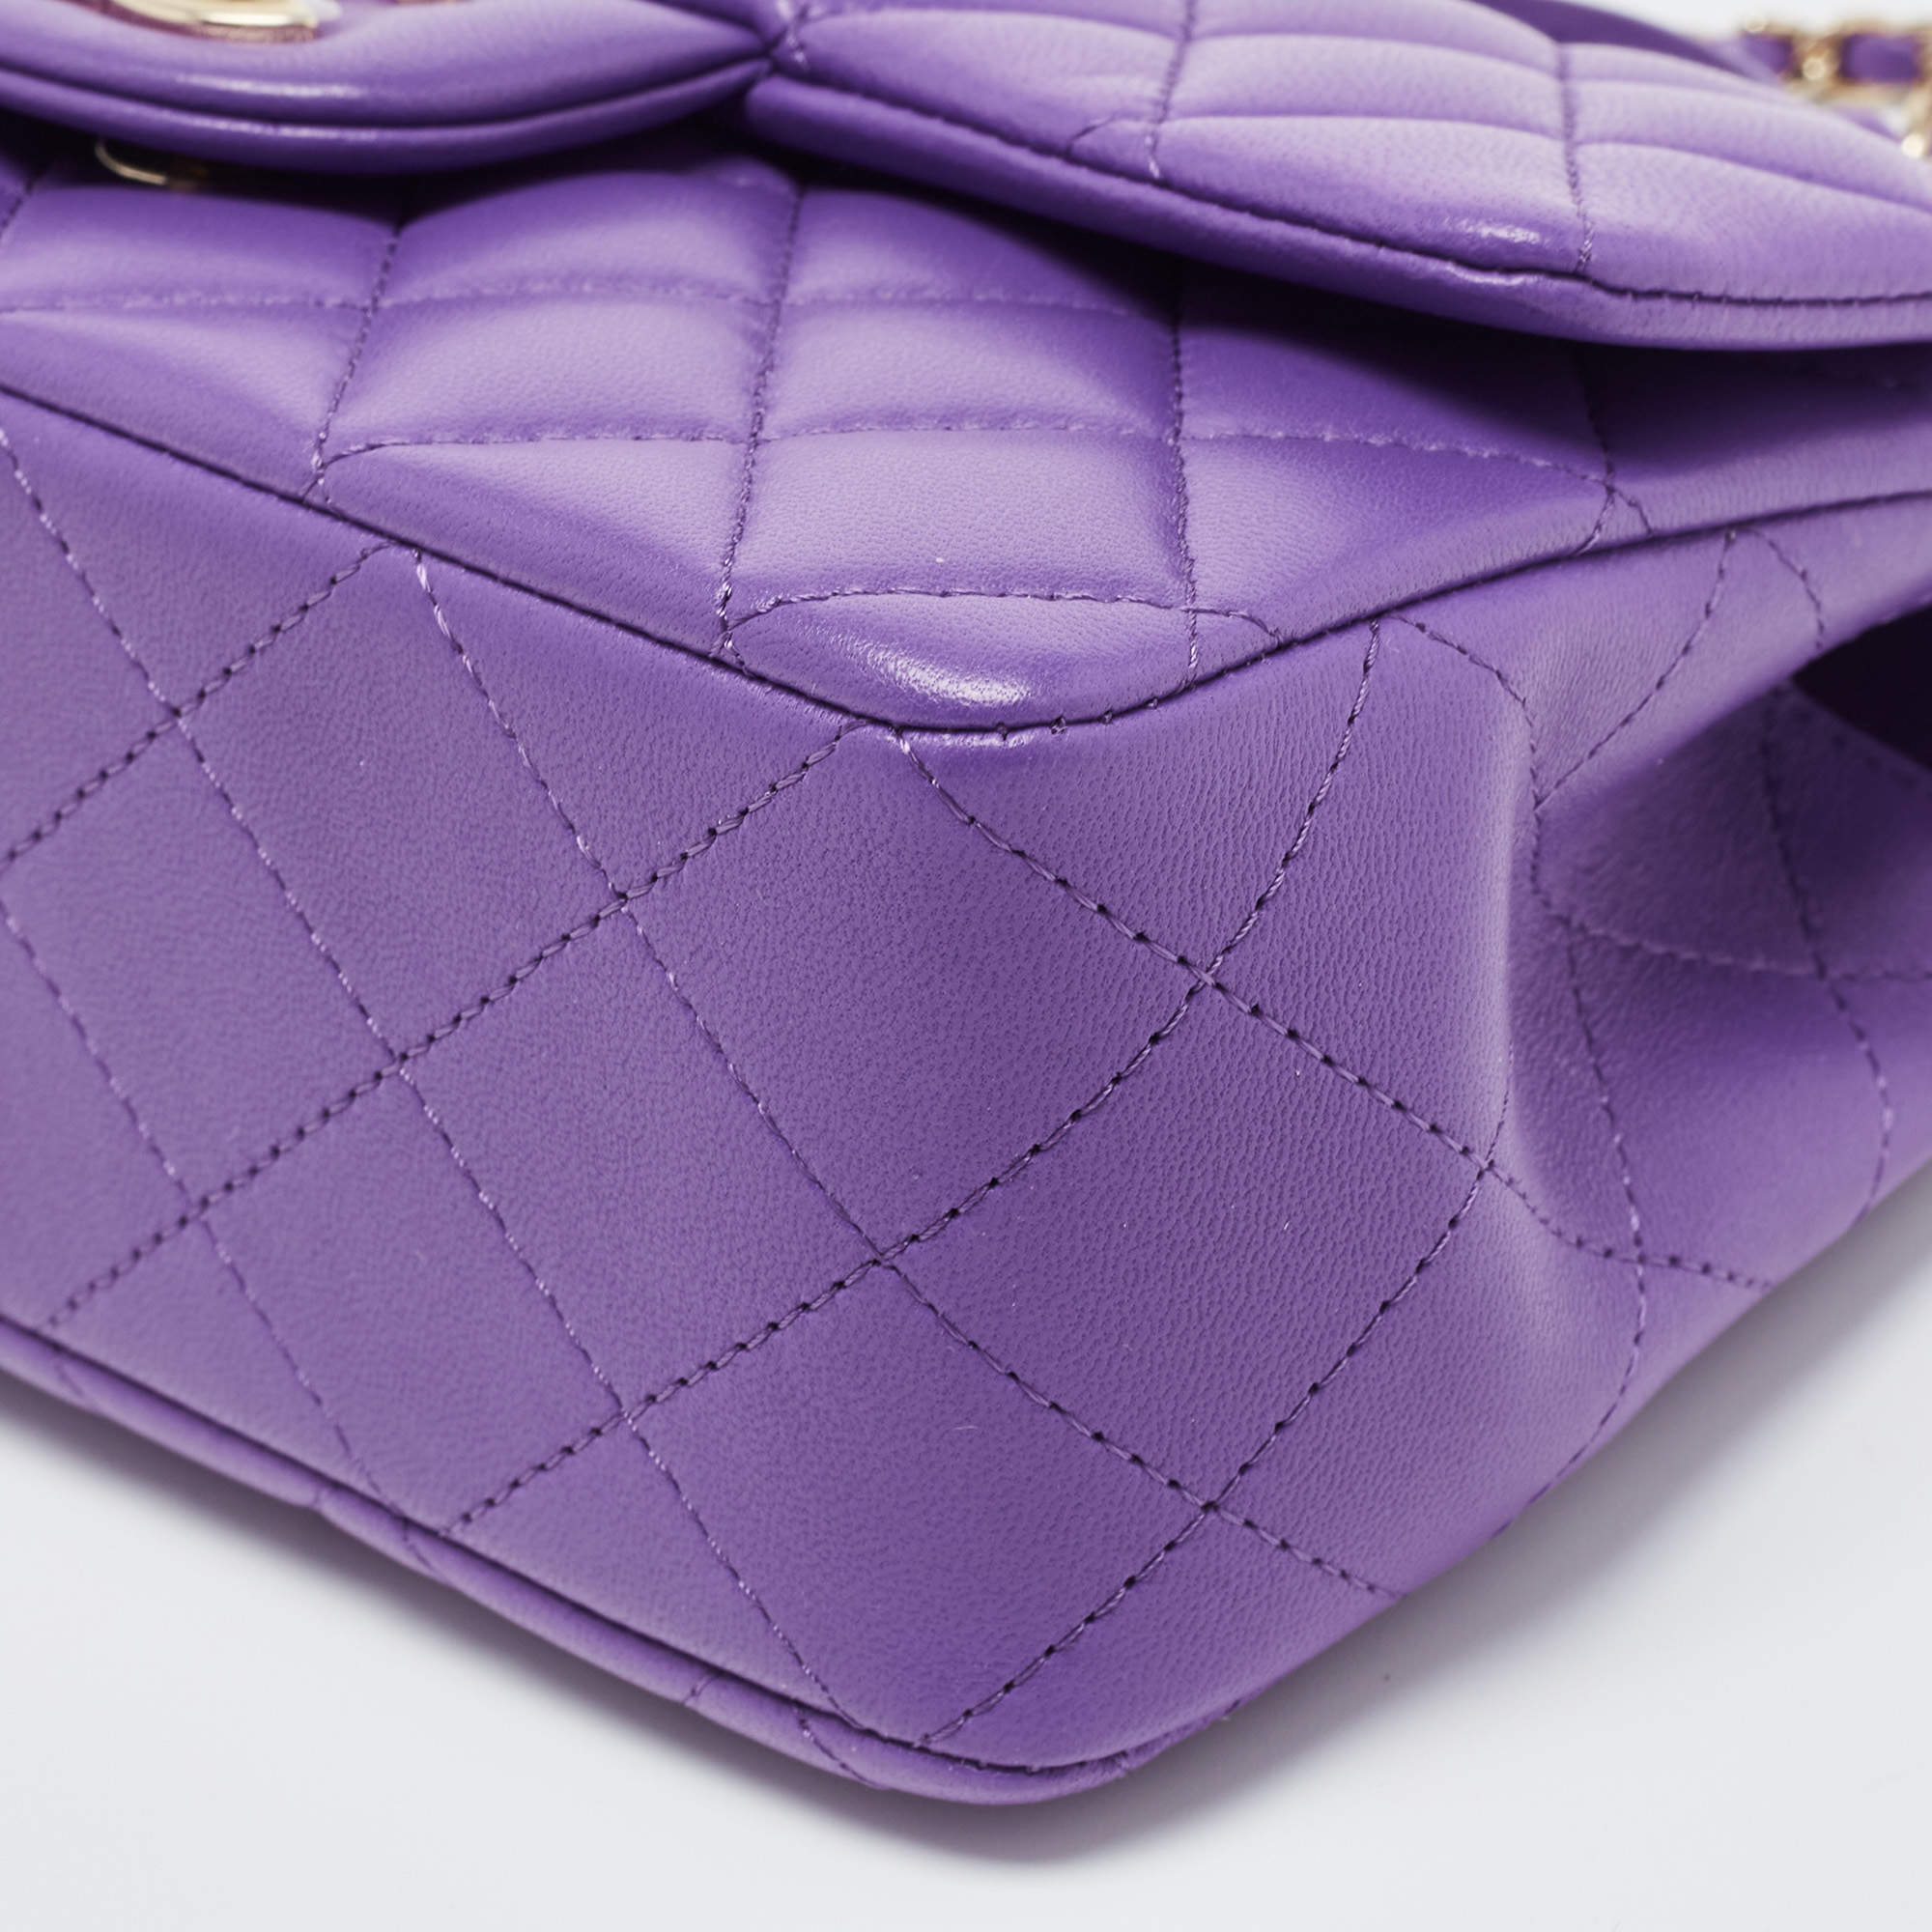 Chanel Purple Quilted Leather Mini Classic Top Handle Bag